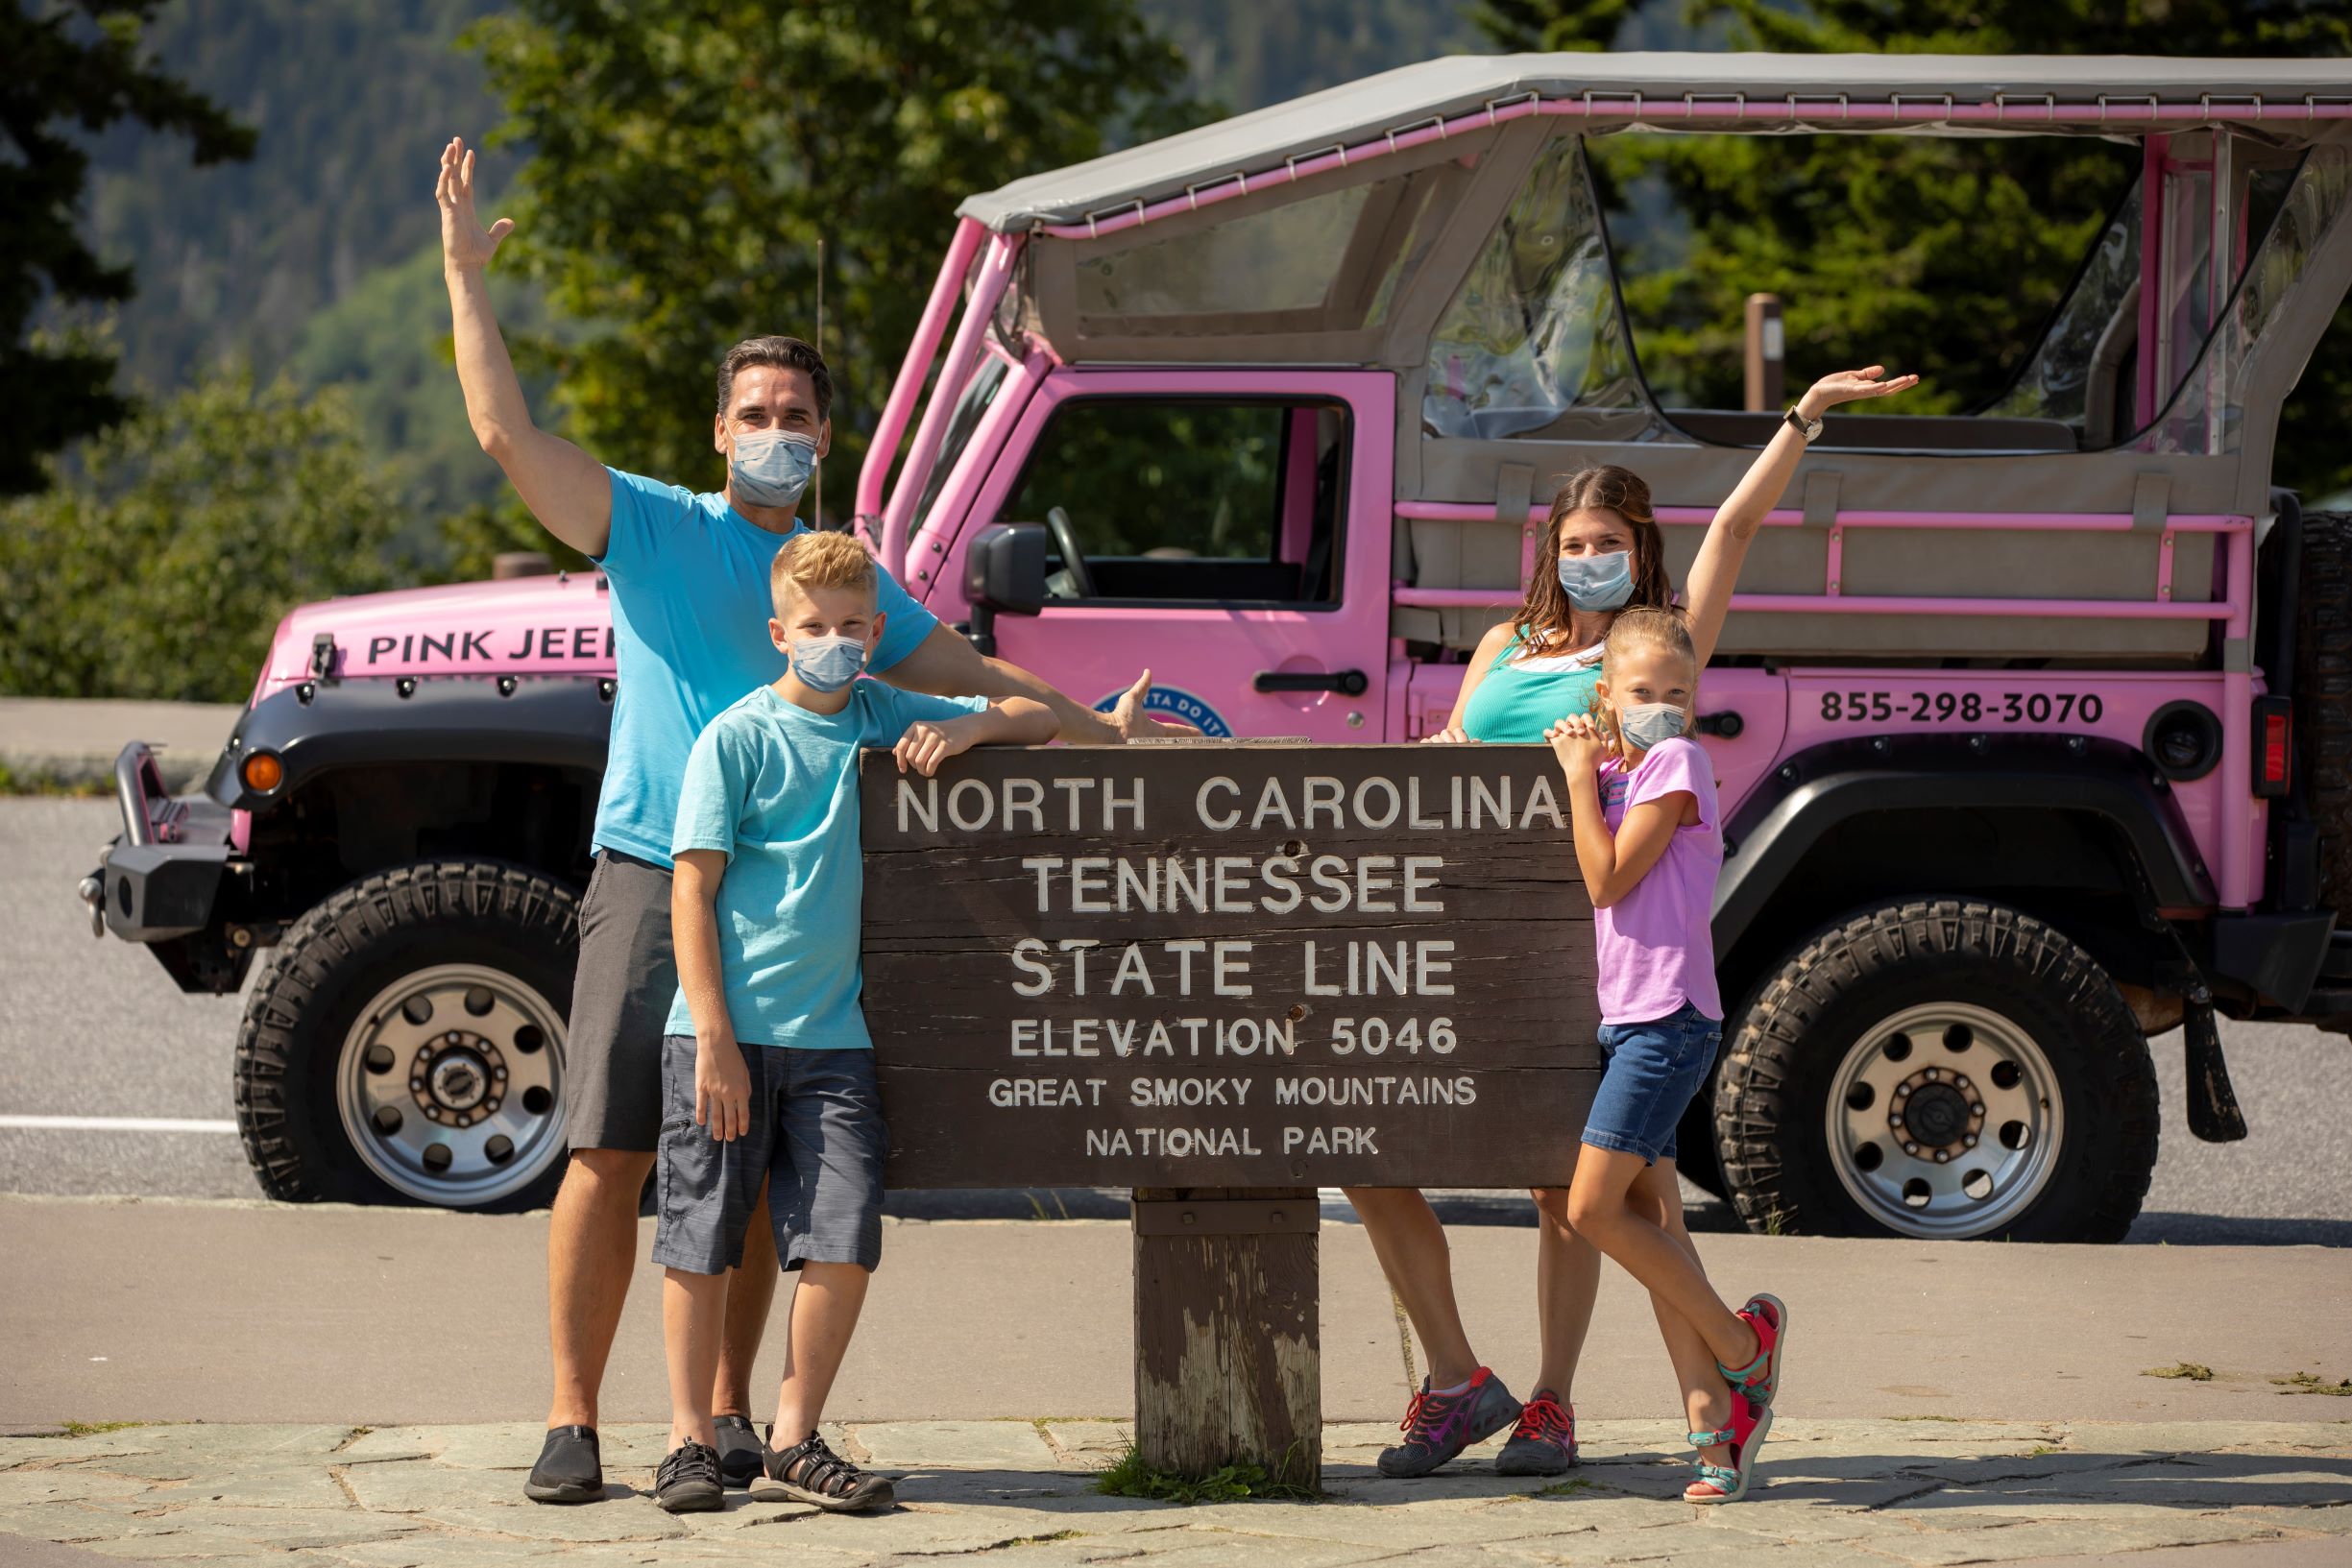 PINK® Jeep® Tours expanded to Pigeon Forge and the Smoky Mountains last year and has been sharing memorable experiences with millions of tourists in Sedona, Arizona since 1960.